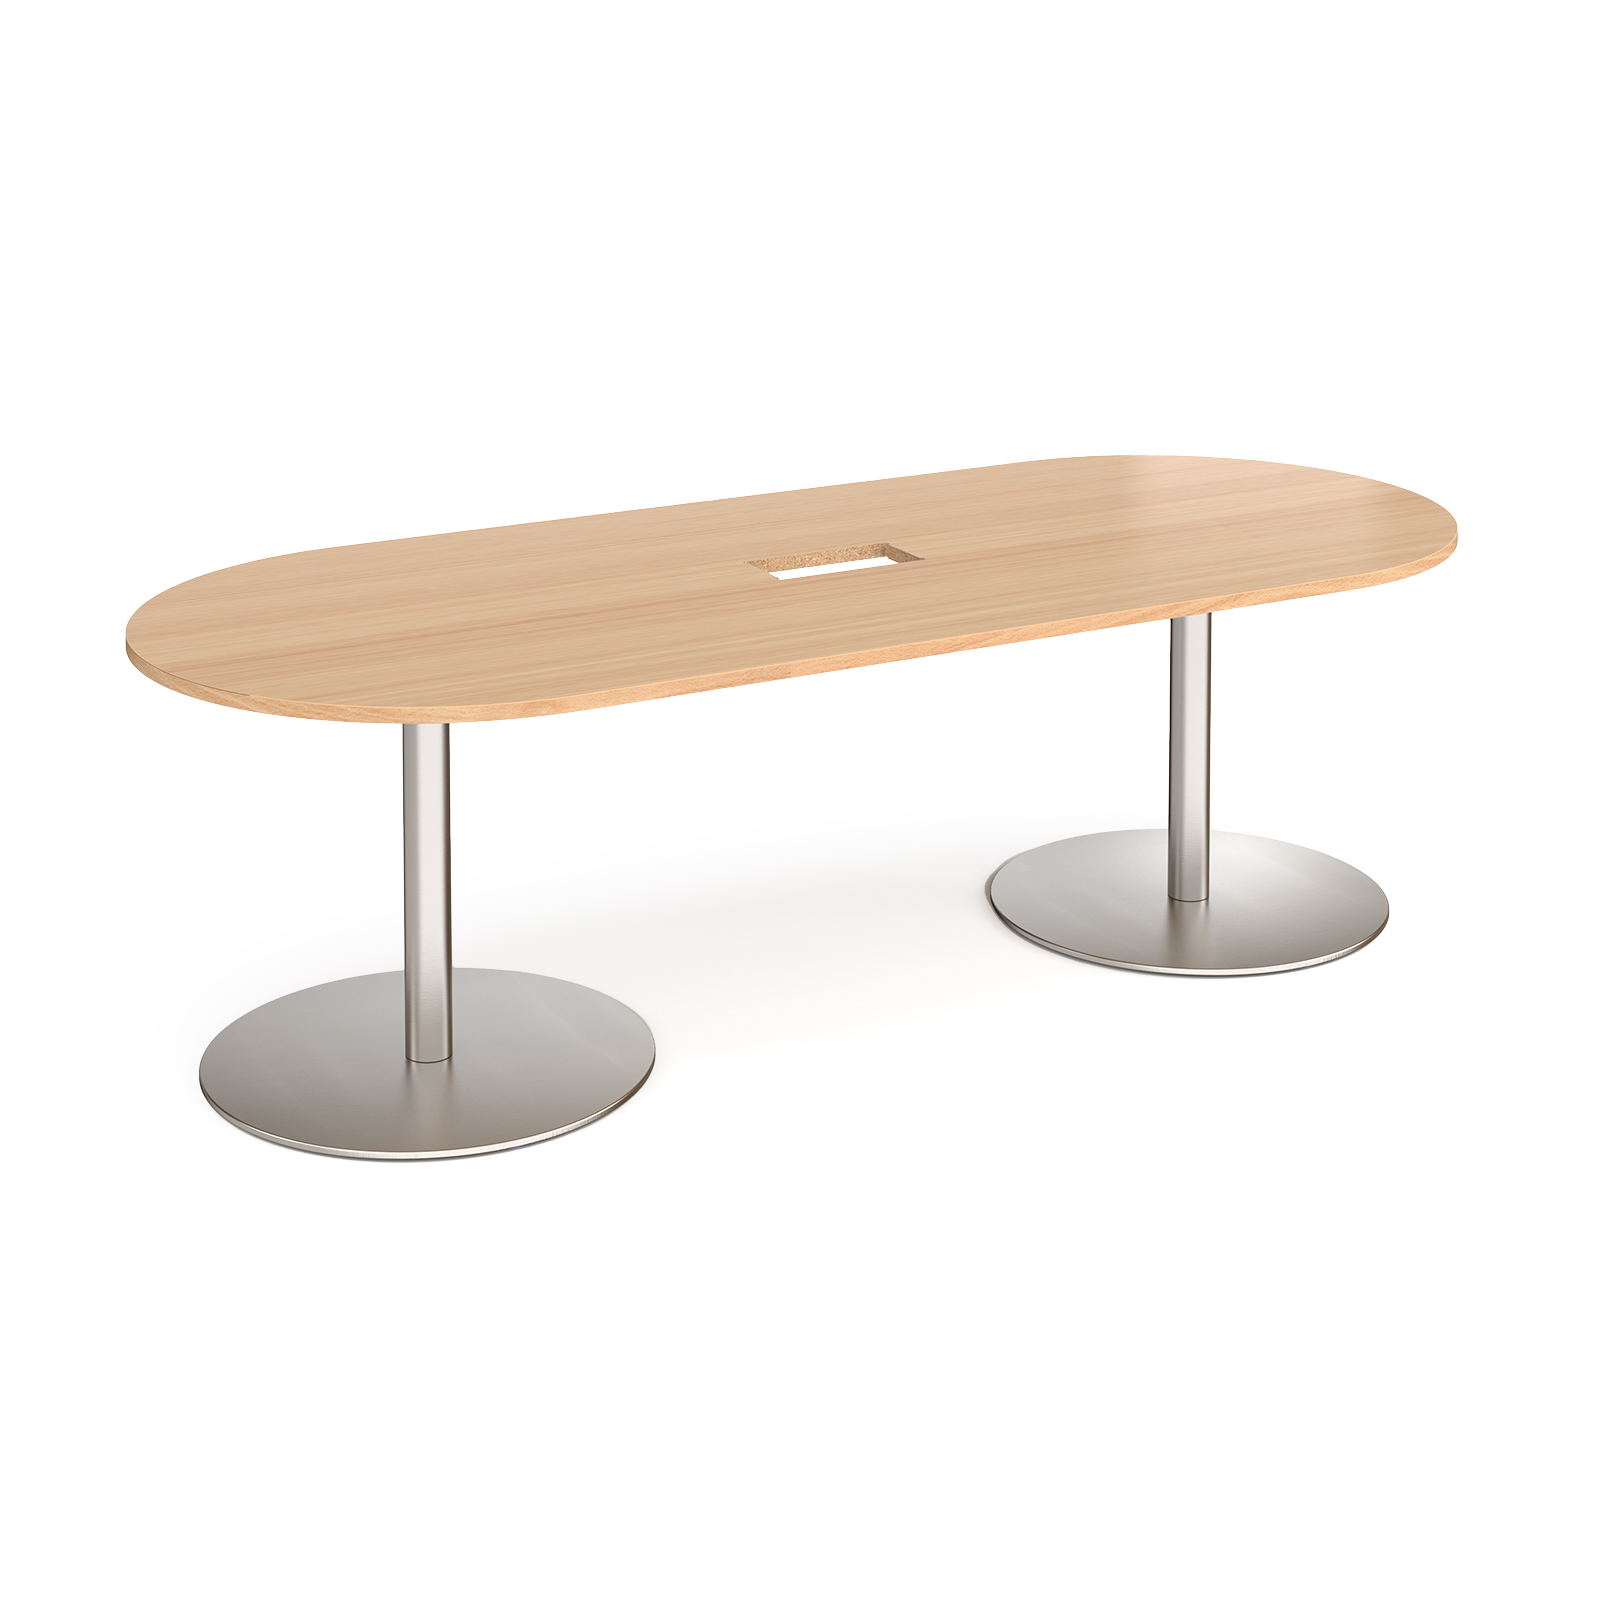 Eternal radial end boardroom table 2400mm x 1000mm with central cutout 272mm x 132mm - brushed steel base, beech top